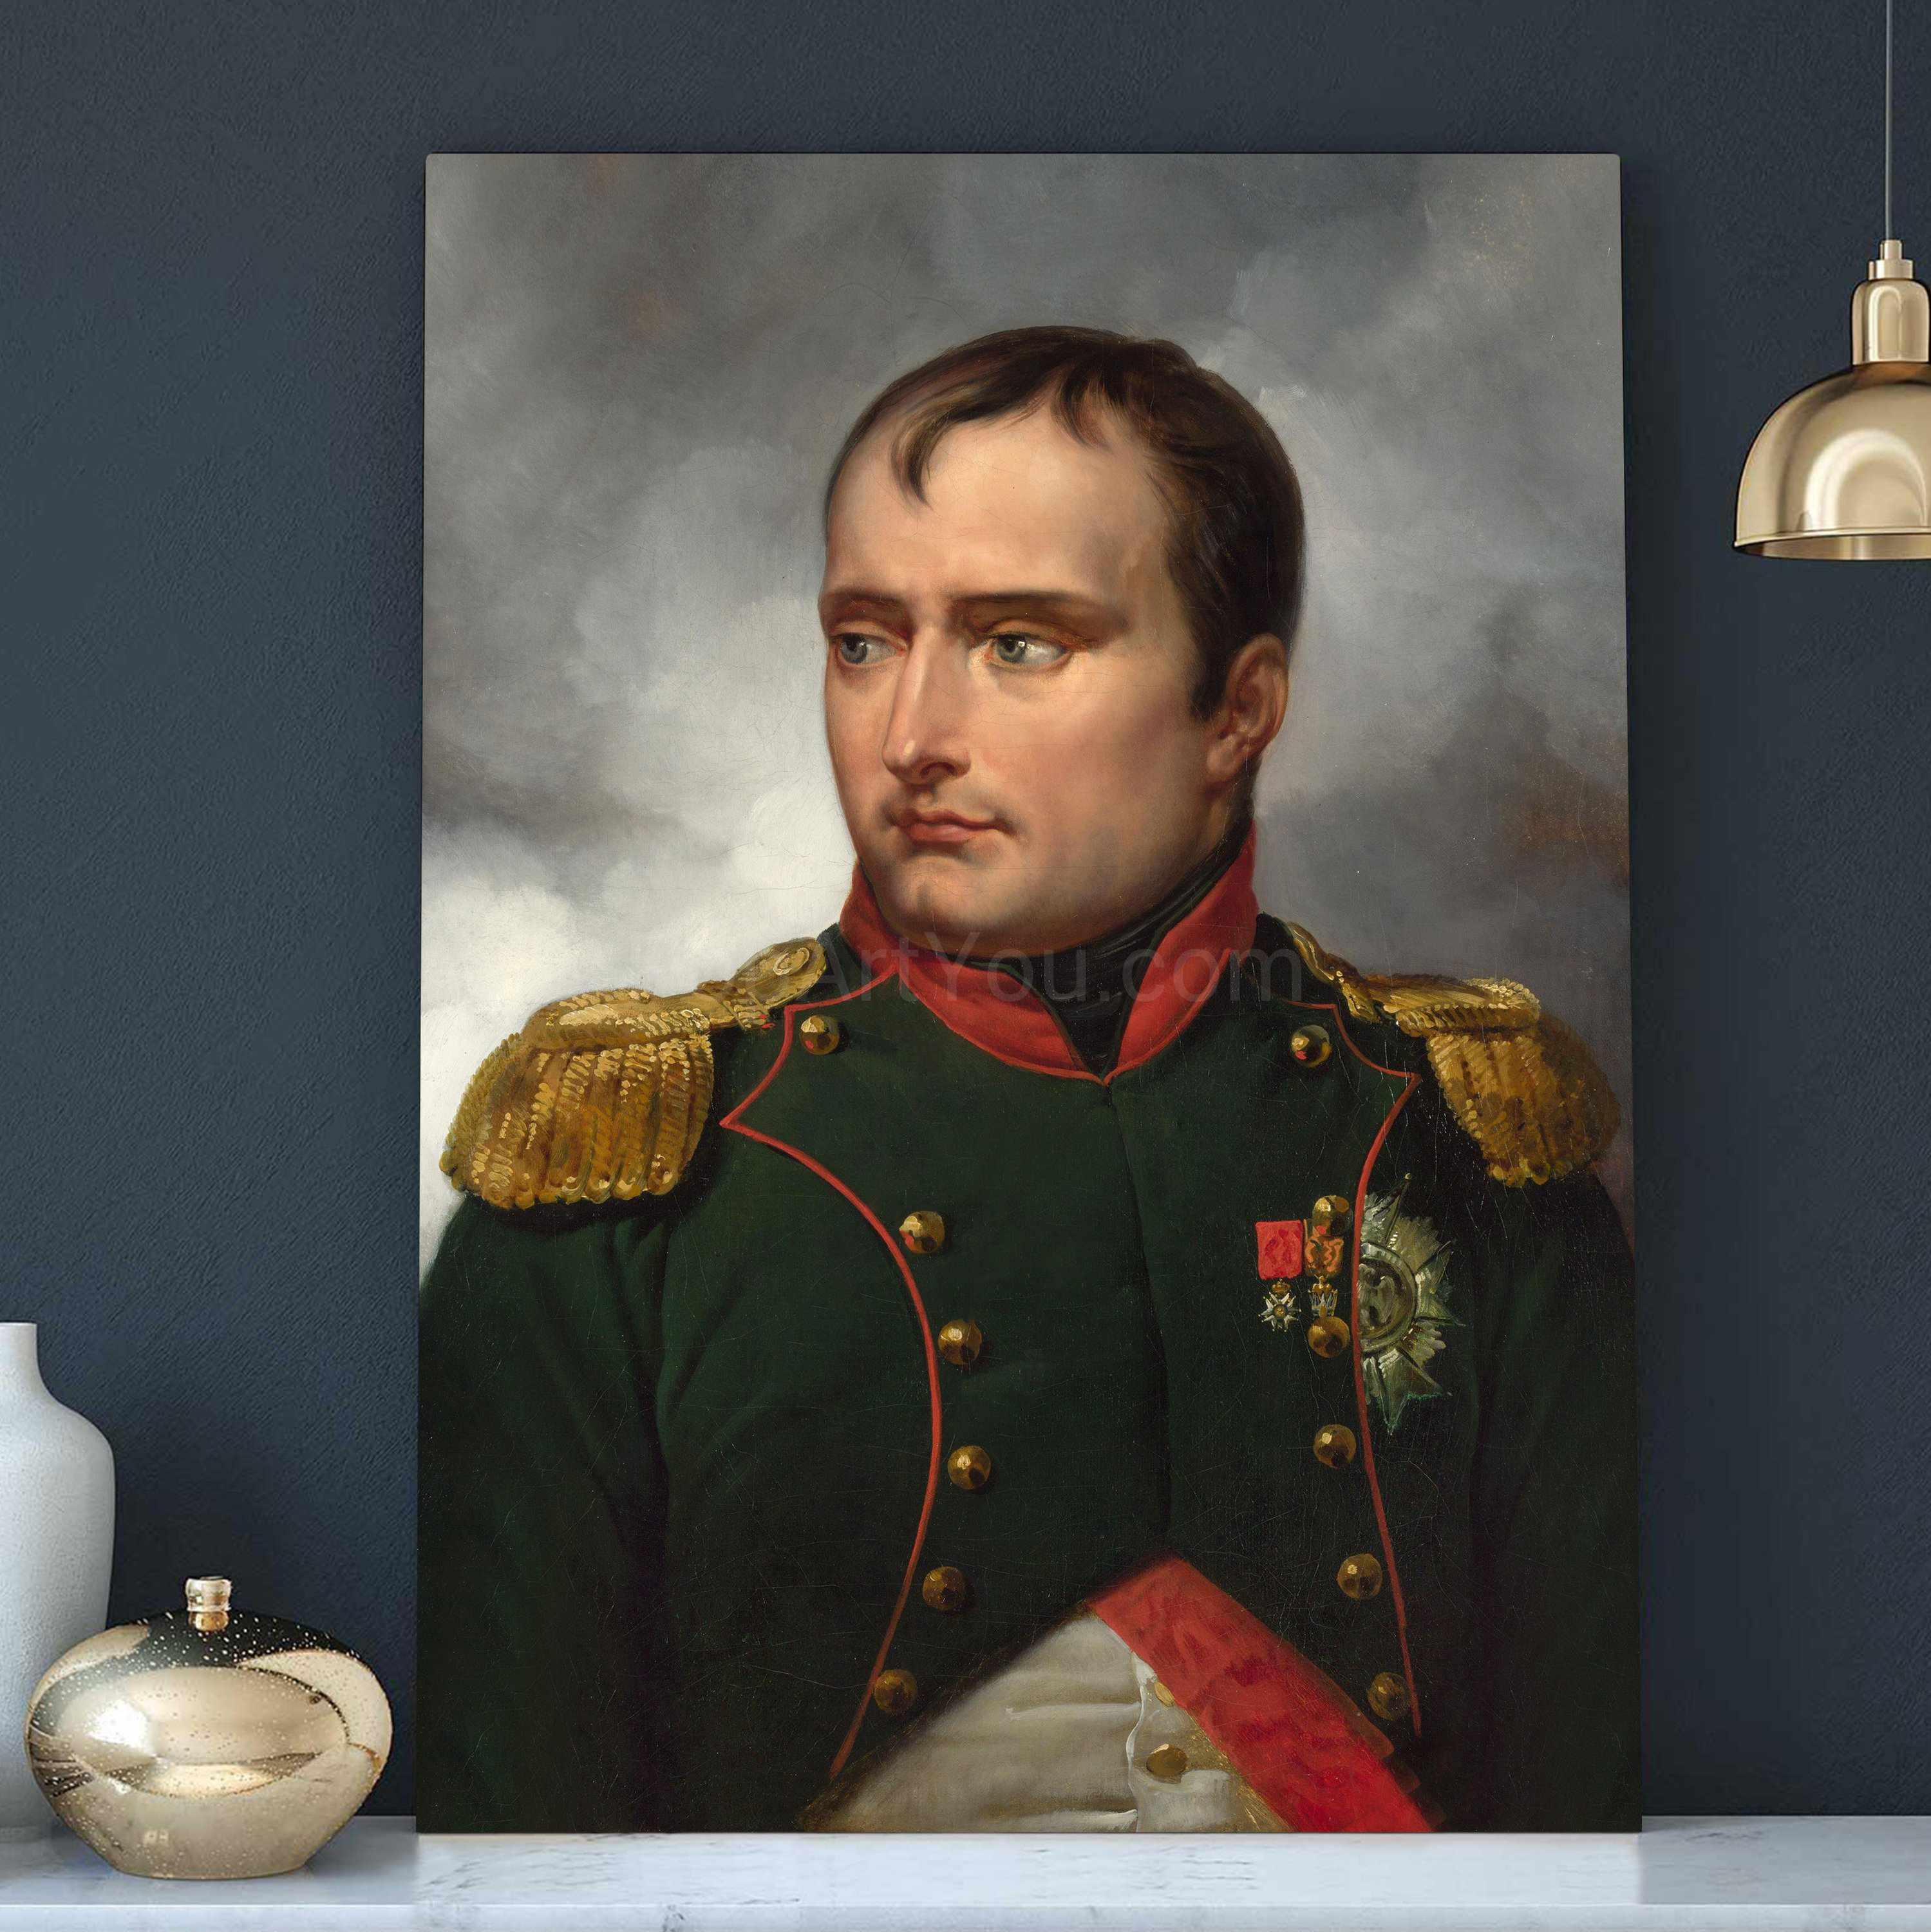 A portrait of a man dressed in renaissance regal attire stands on a white table against a blue wall